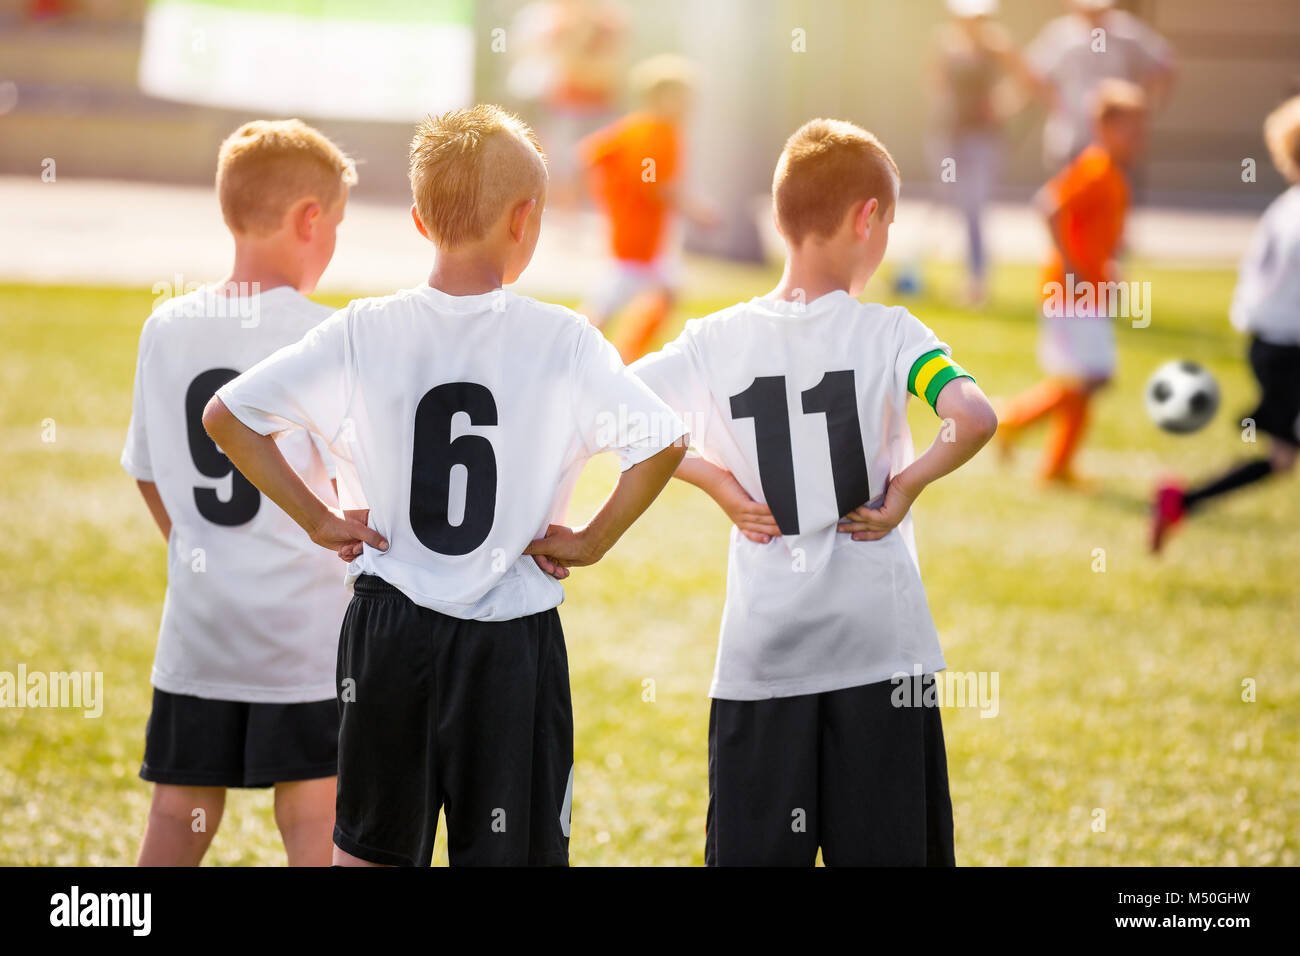 Kids Soccer Team Players Standing on Grass Pitch on a Sunny Day. Young Boys Watching Soccer Match. Youth Footballers of Soccer Academy. Football Tourn Stock Photo